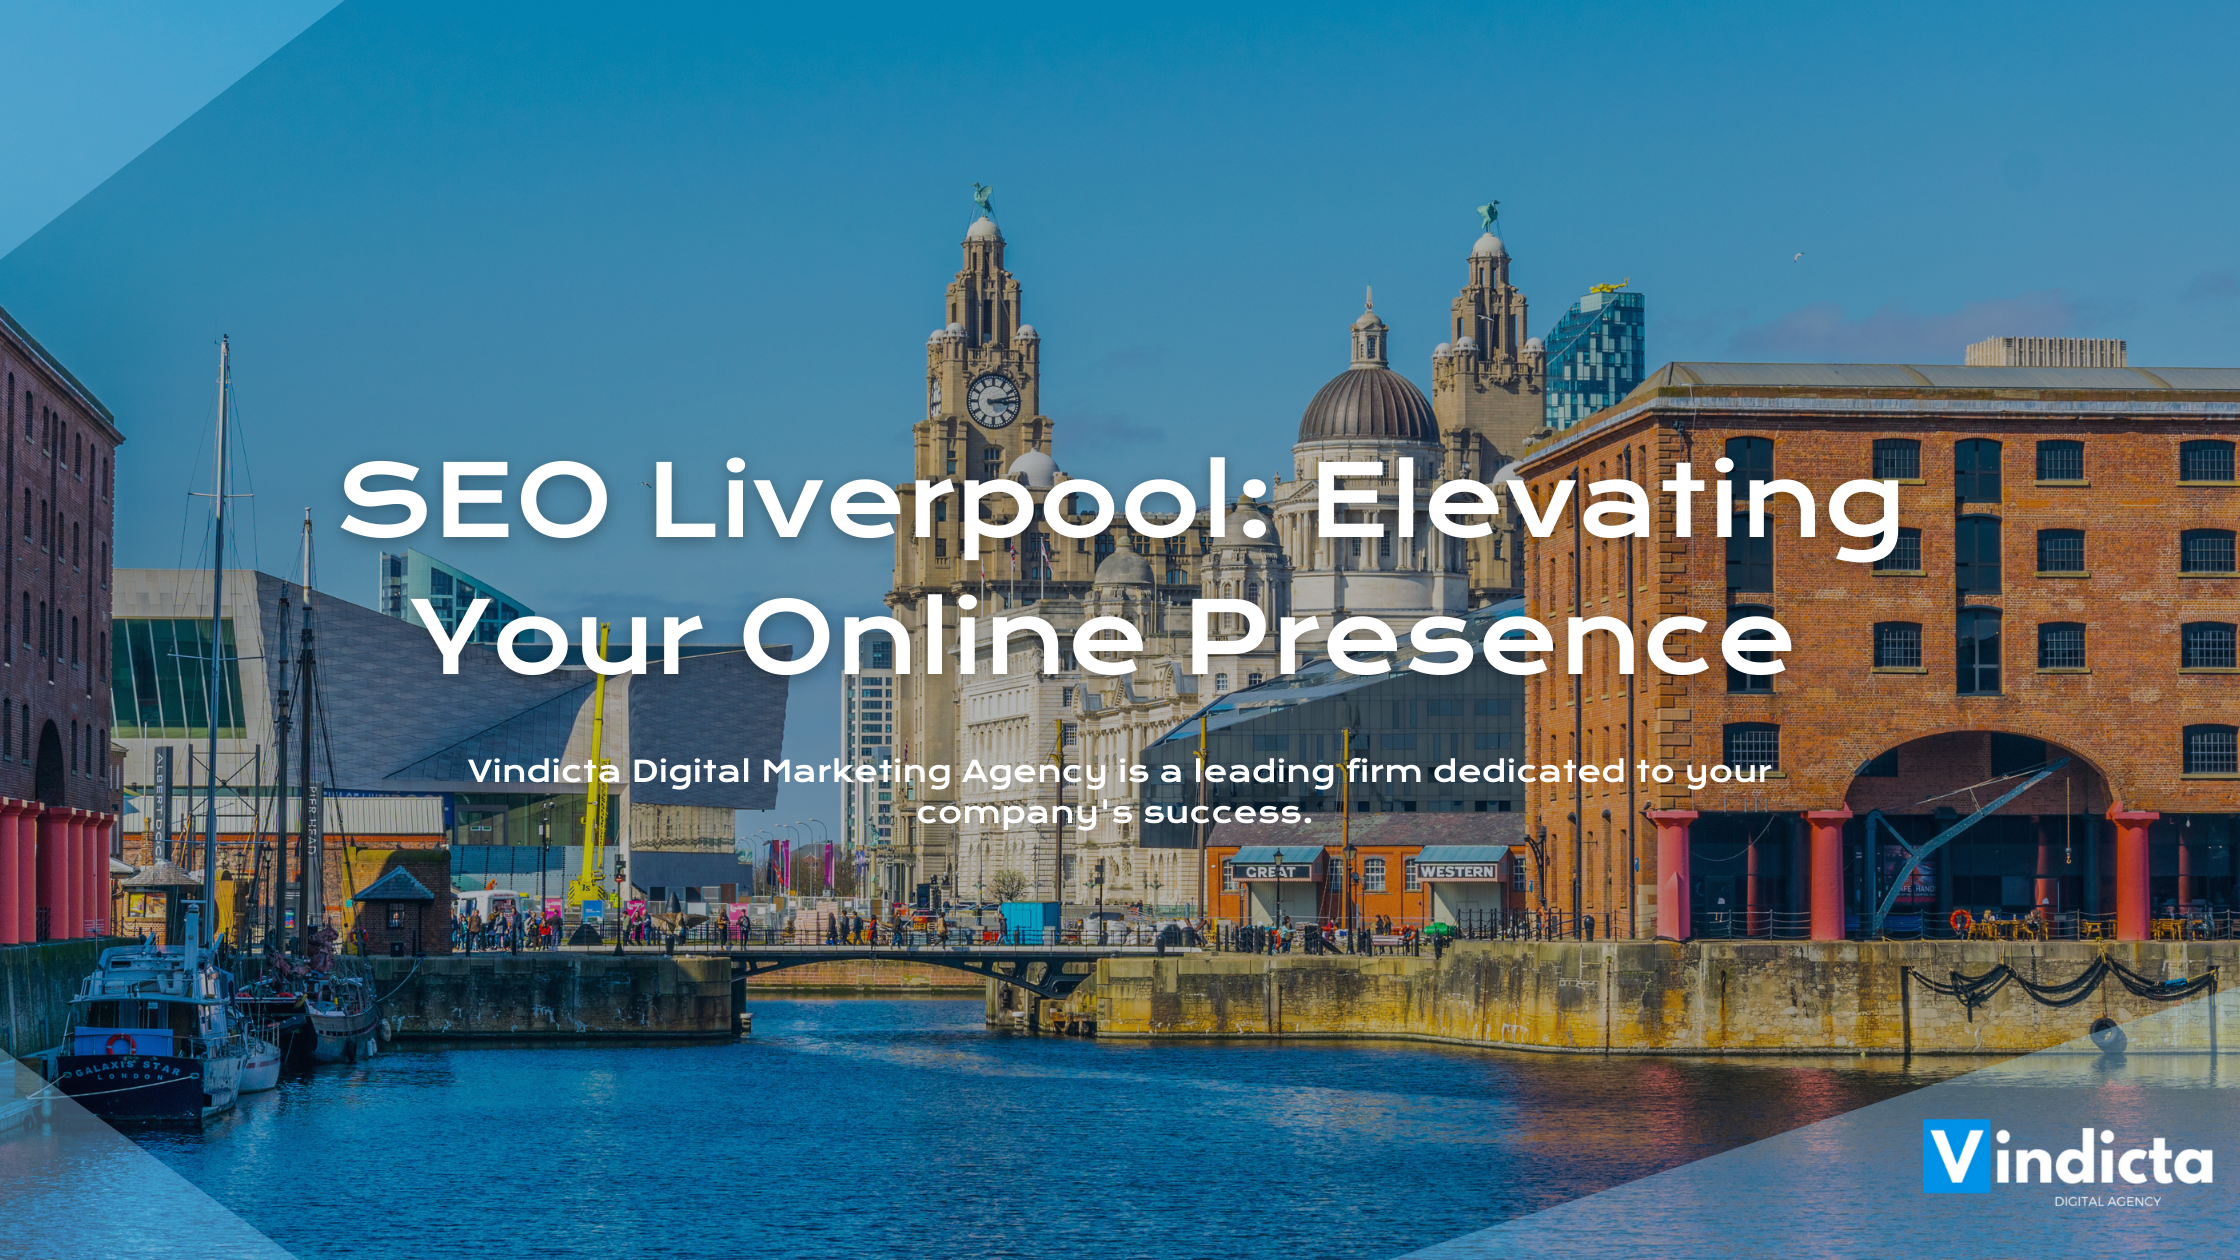 SEO Liverpool: Elevating Your Online Presence